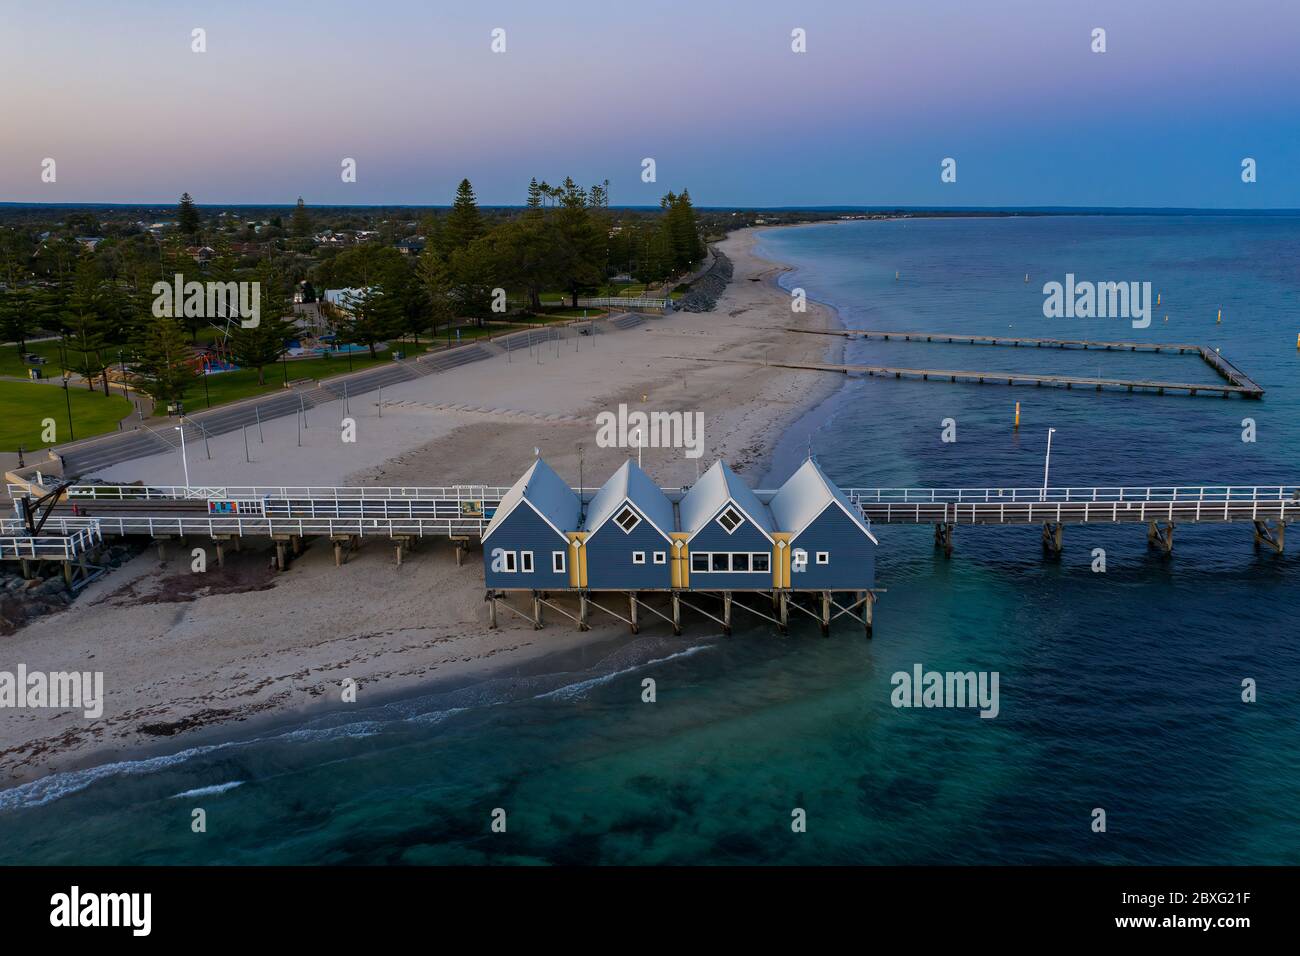 Busselton Western Australia November 8th 2019 : Aerial view of the huts at the start of the Busselton Jetty at dawn; Busselton is located 220 km spout Stock Photo